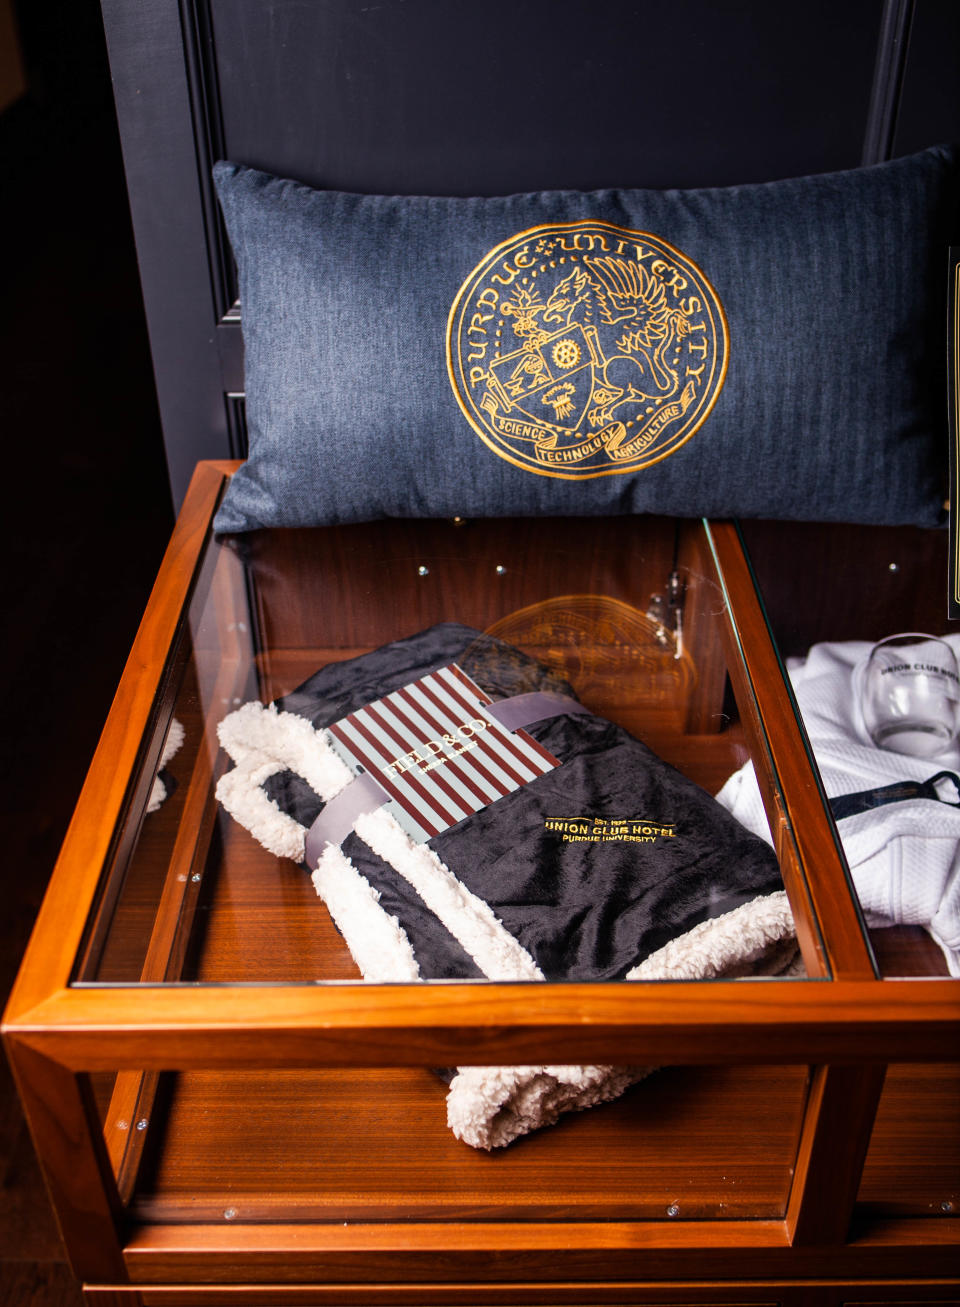 The Union Club Hotel at Purdue University sells a number of items a Boilermaker might enjoy, including a popular pillow available this Christmas.